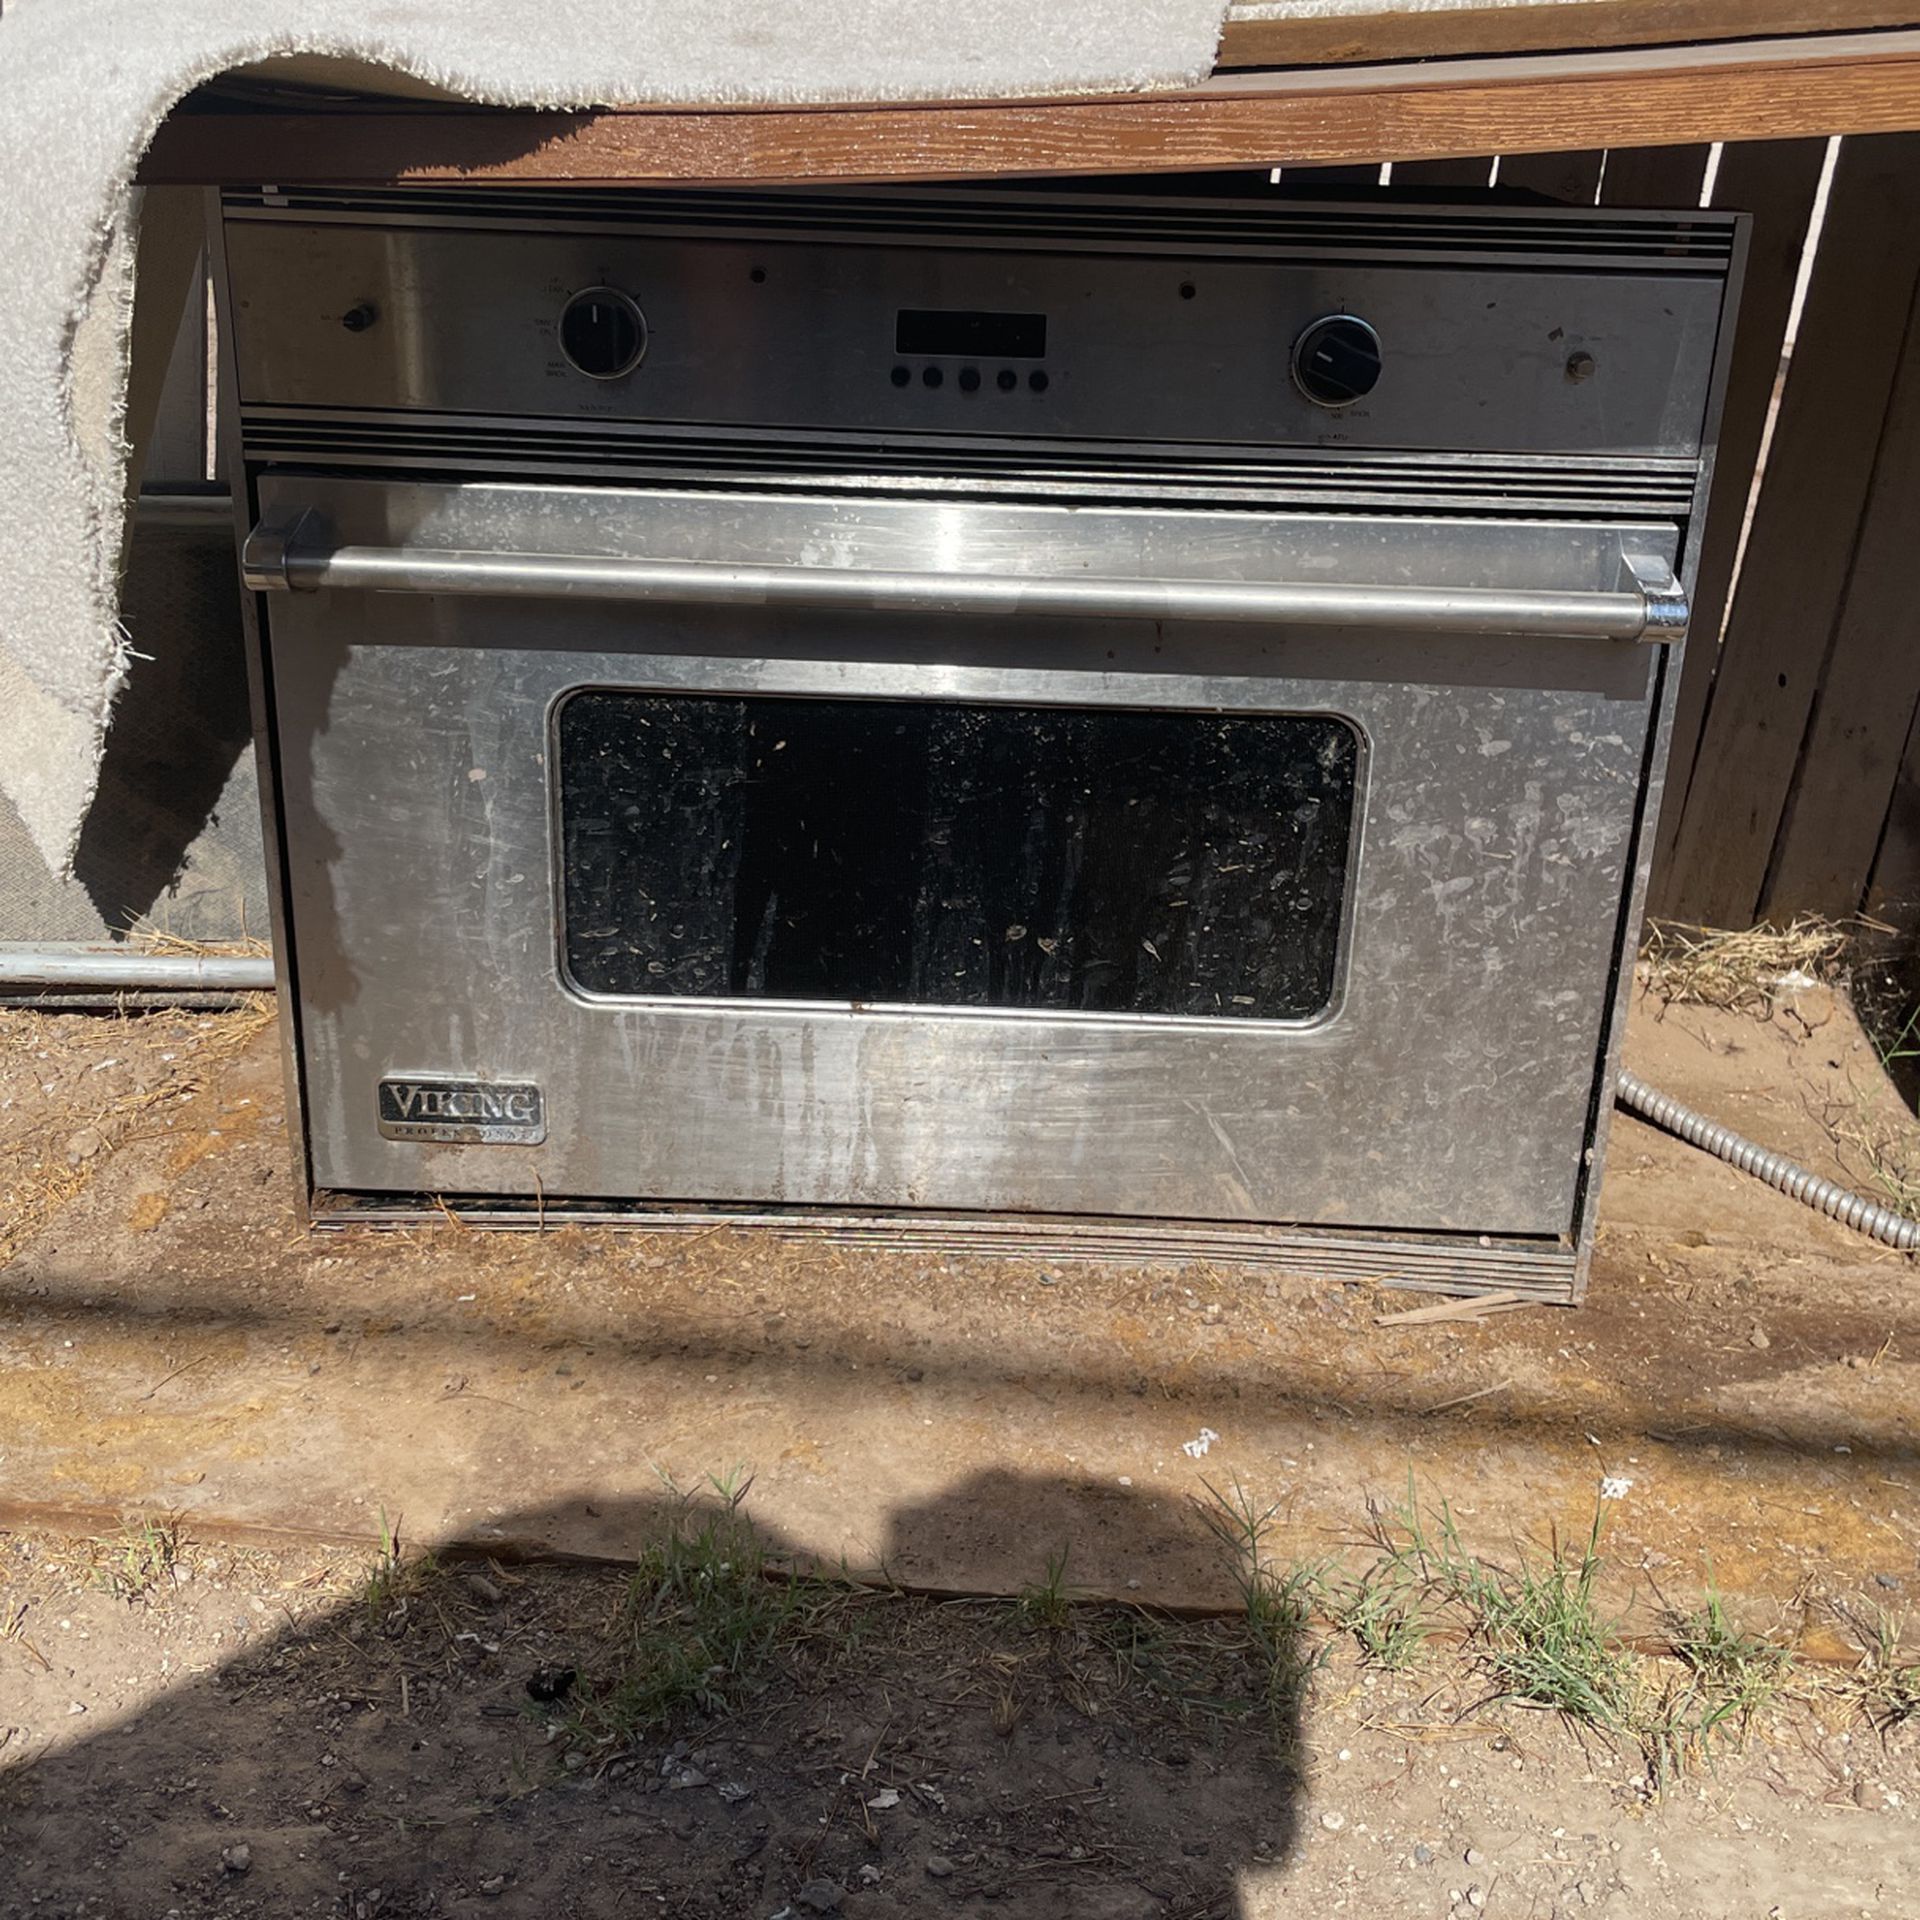 Viking Oven And Trash Compactor (350$ For Both) Still Works And In Good Condition 